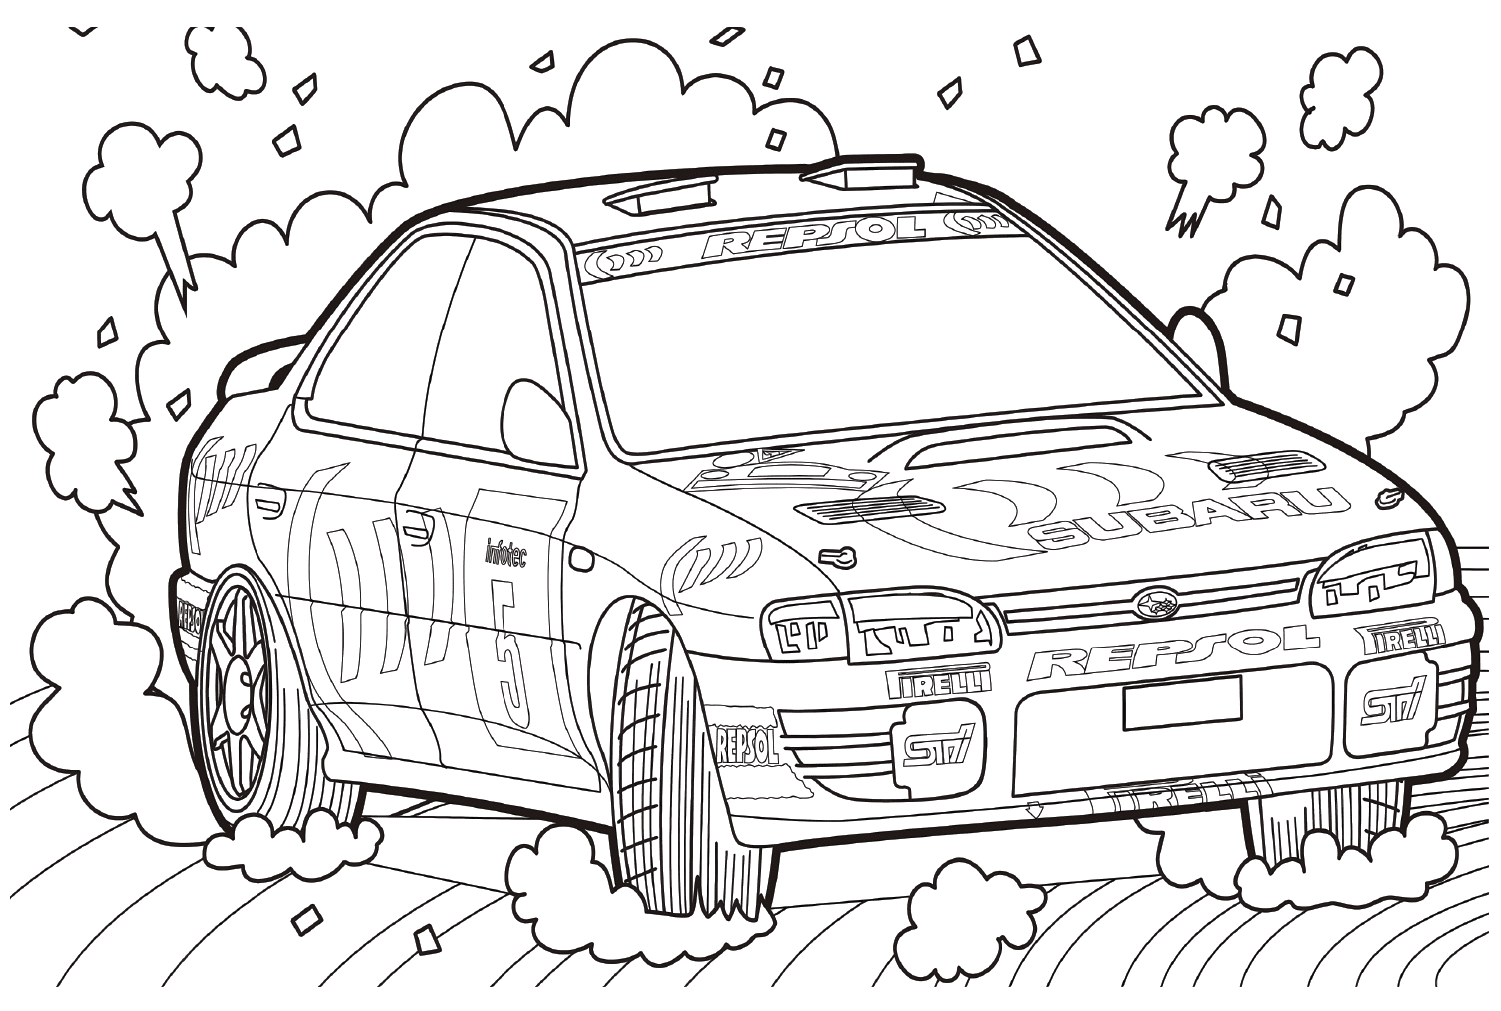 Subaru Coloring Pages to for Kids from Subaru